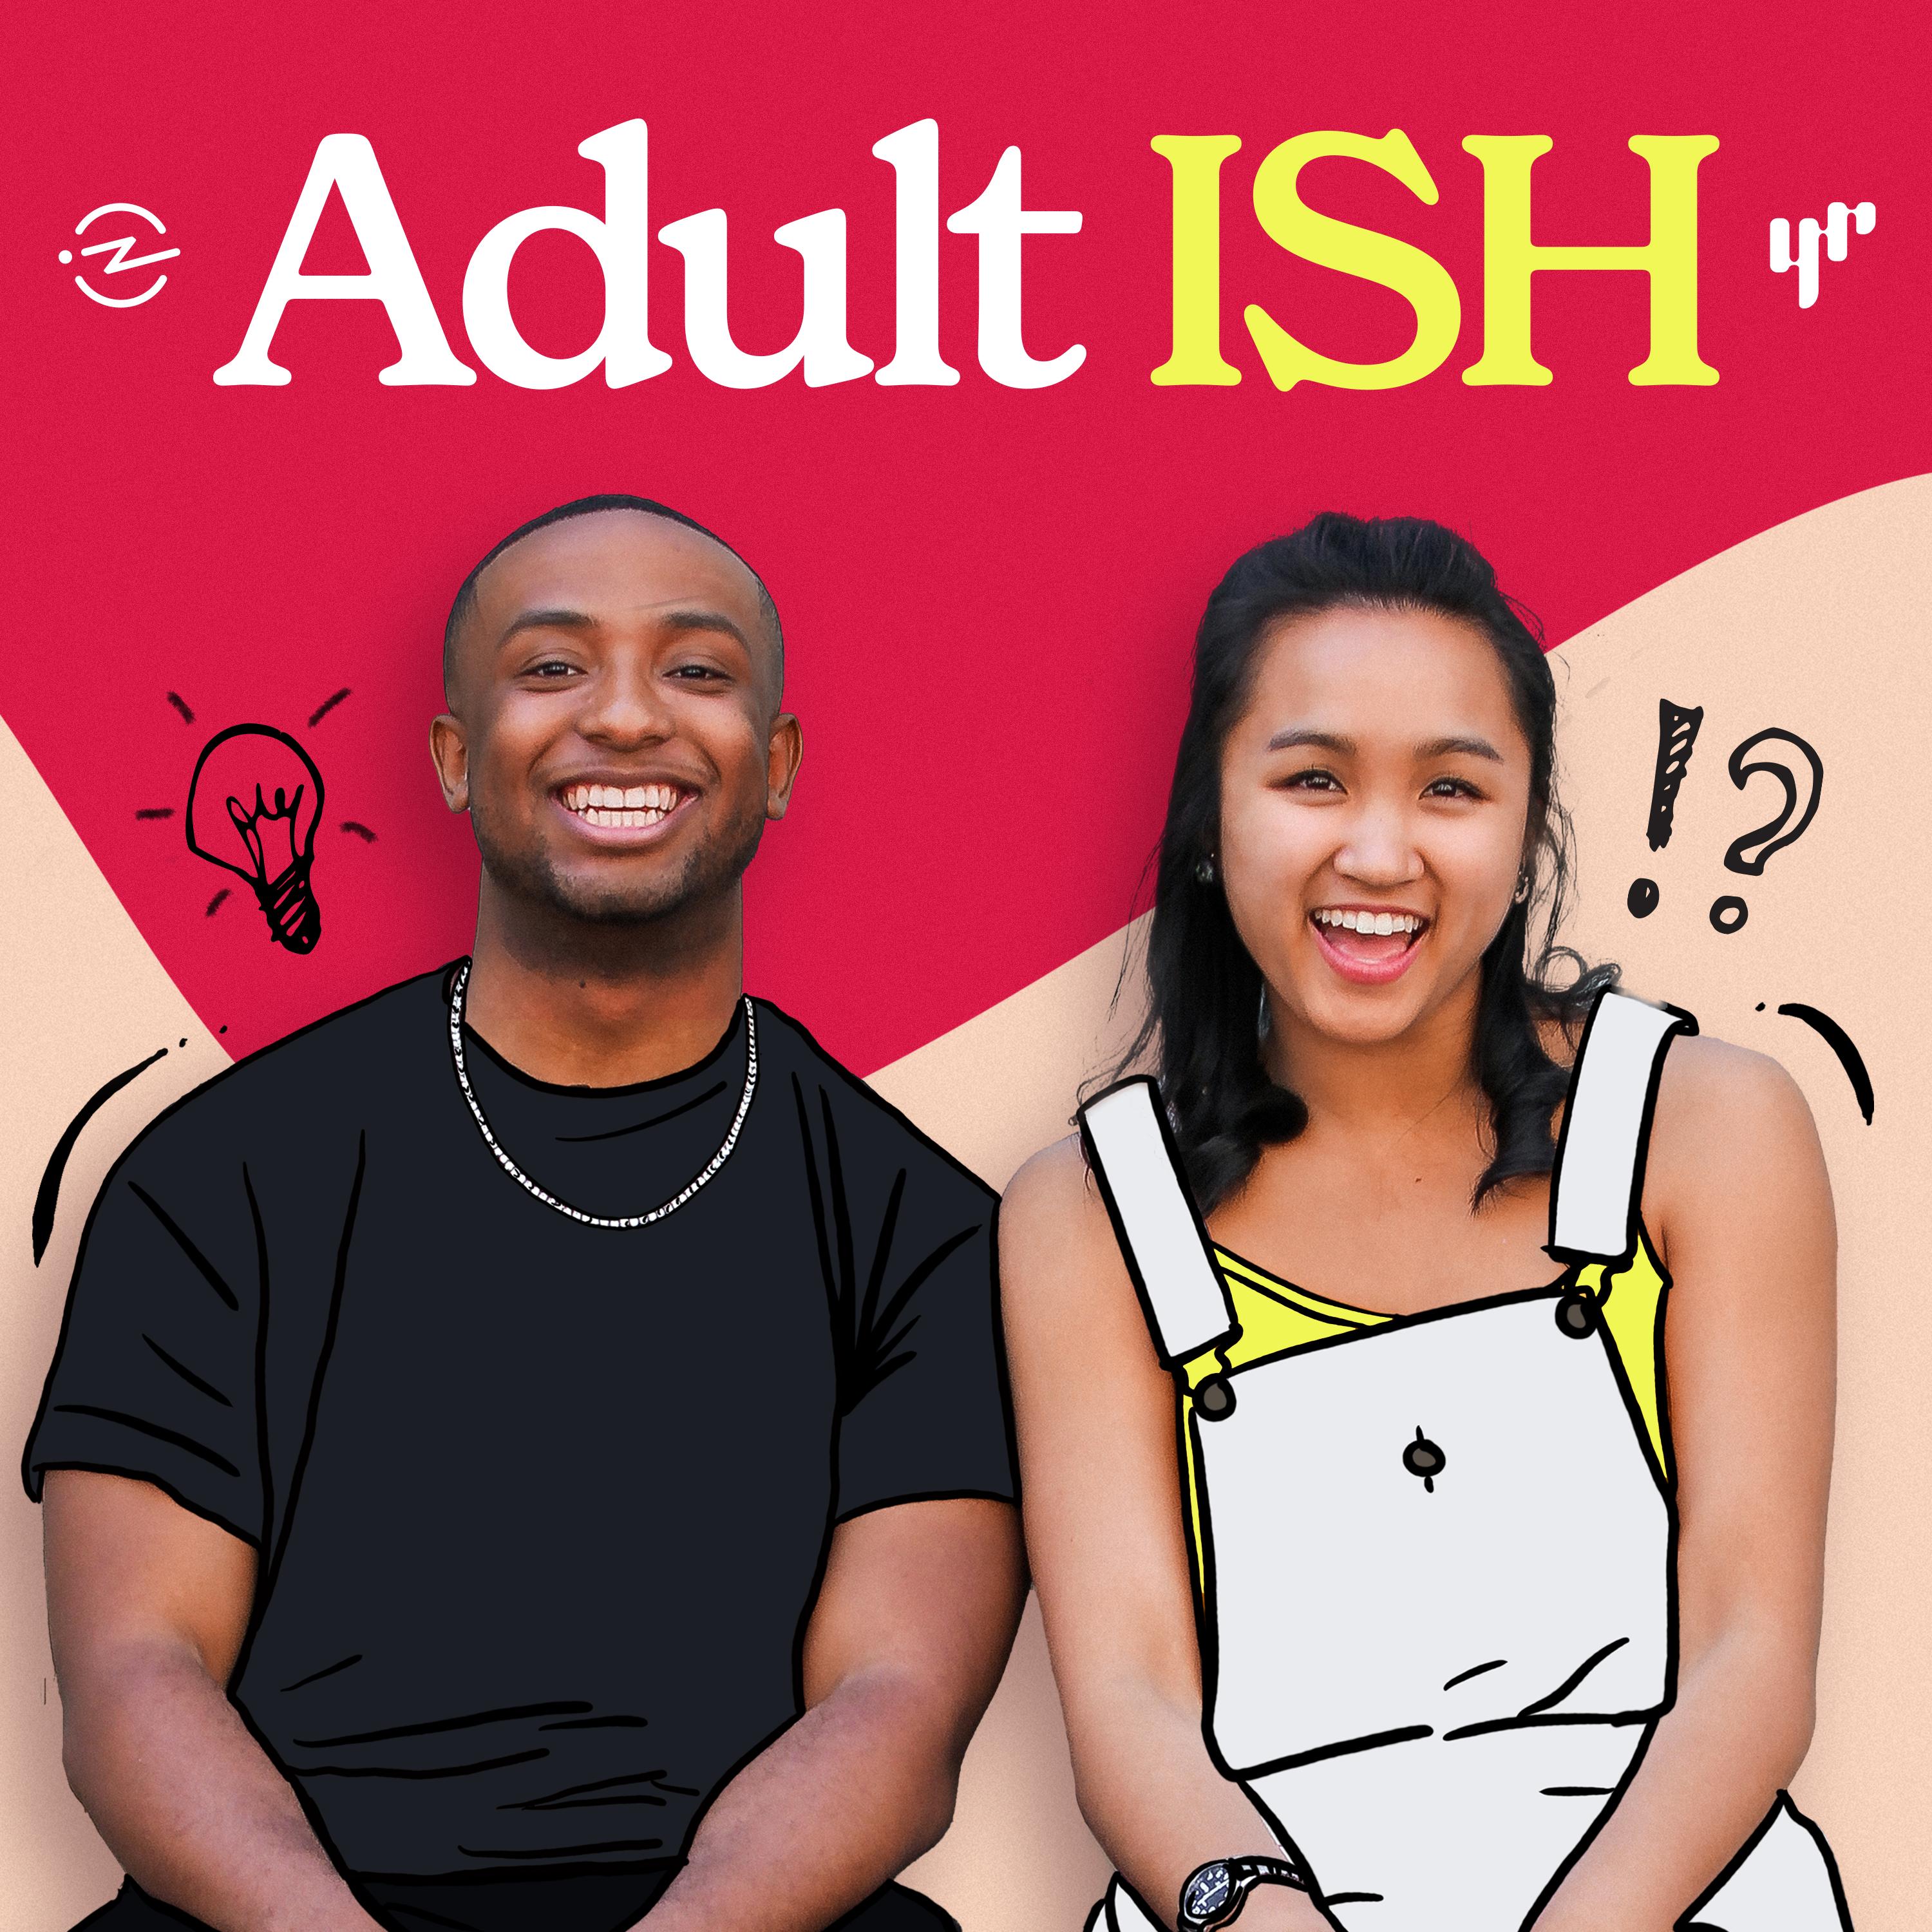 Thumbnail for "Adult ISH S5 Trailer (ft. Mistakes + Mental Health) ".